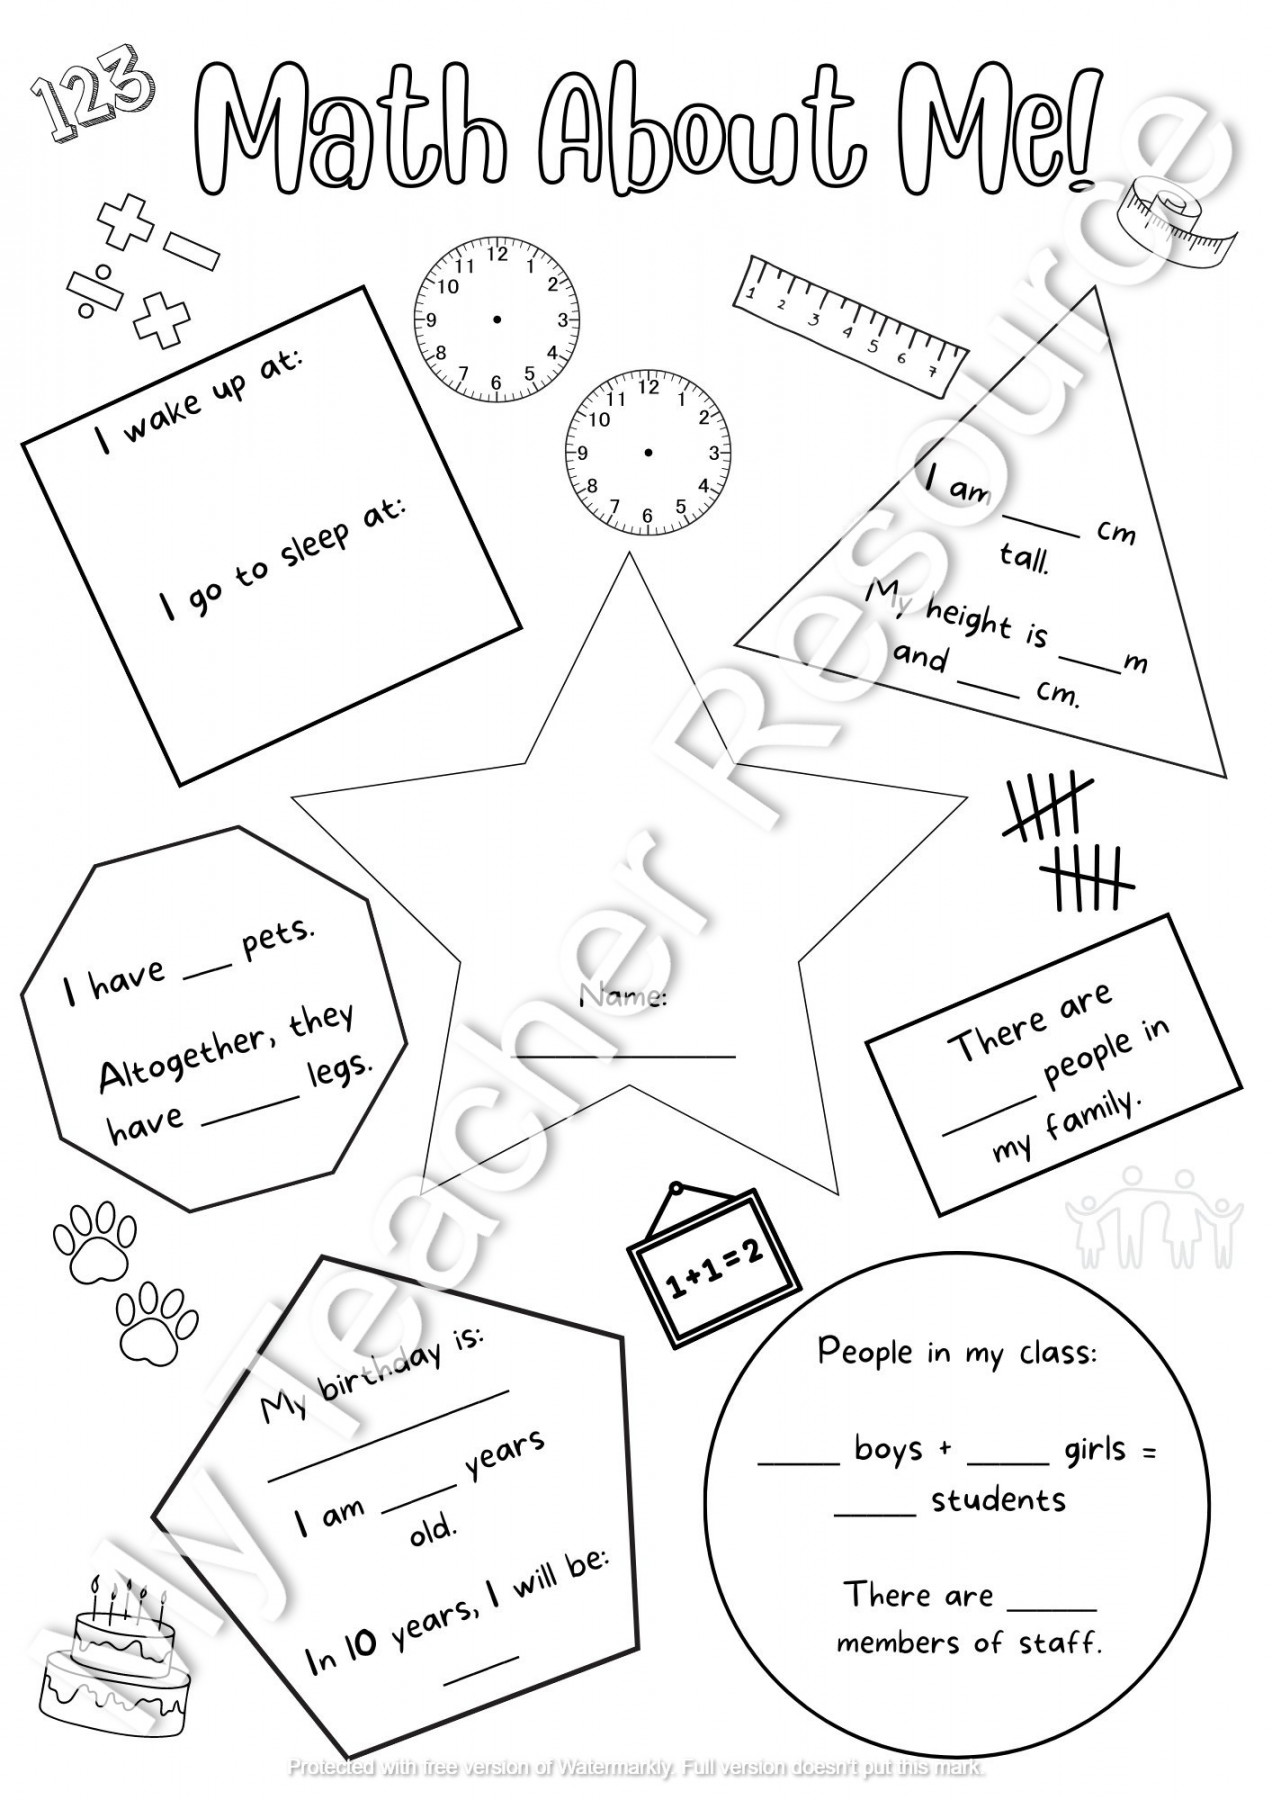 Math About Me, All About Me, KS, KS, Worksheet  Teaching Resources